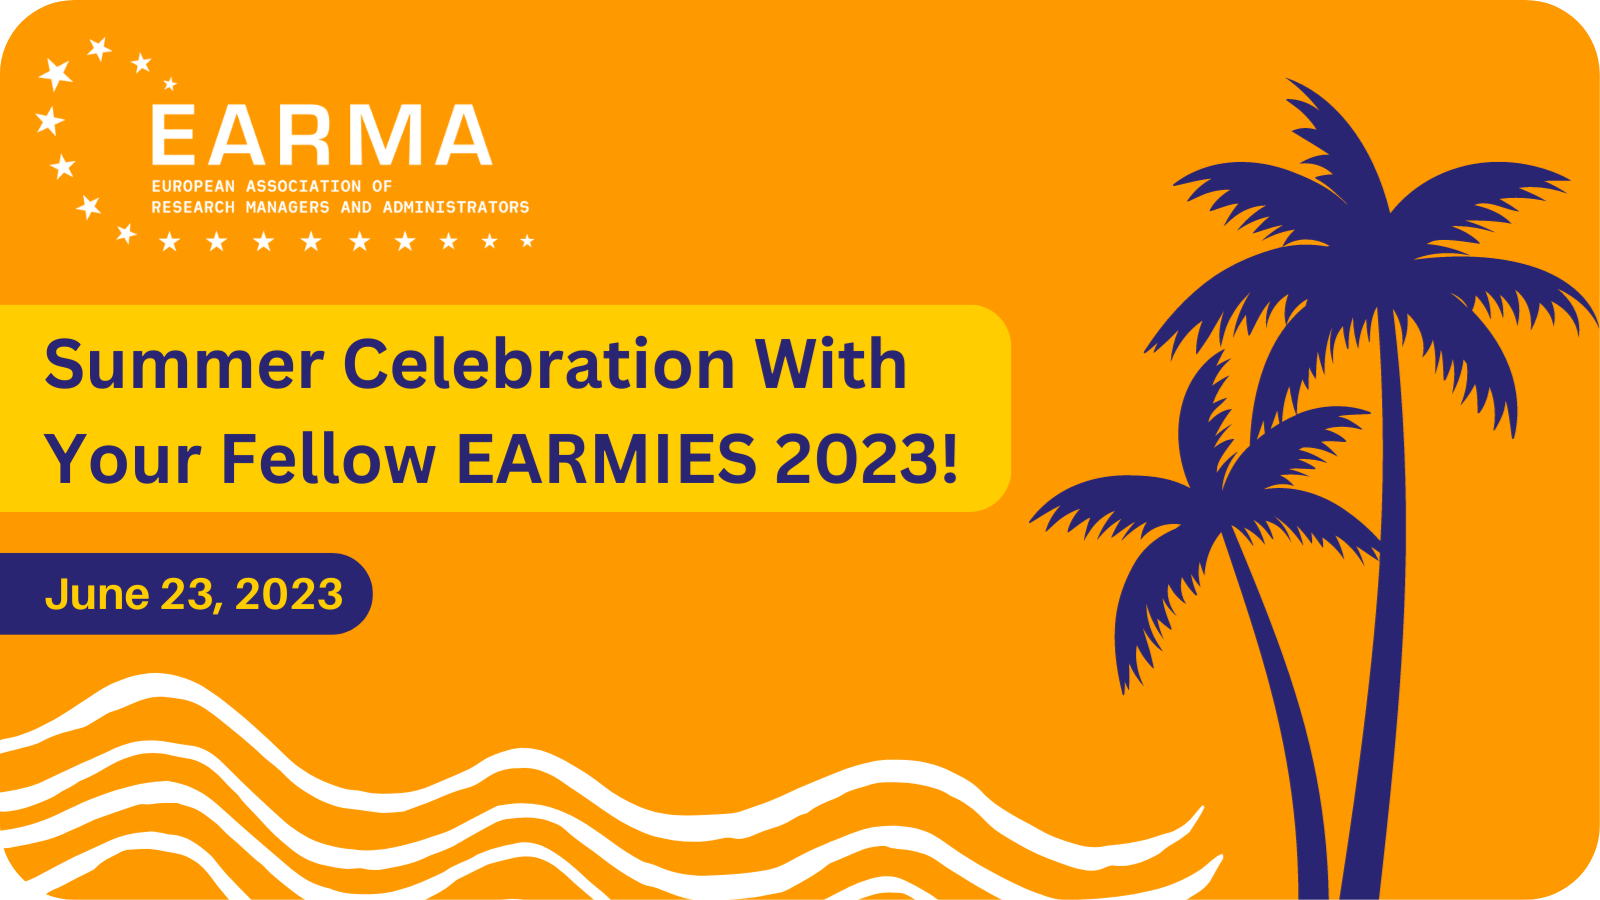 Summer Celebration With Your Fellow EARMIES 2023!